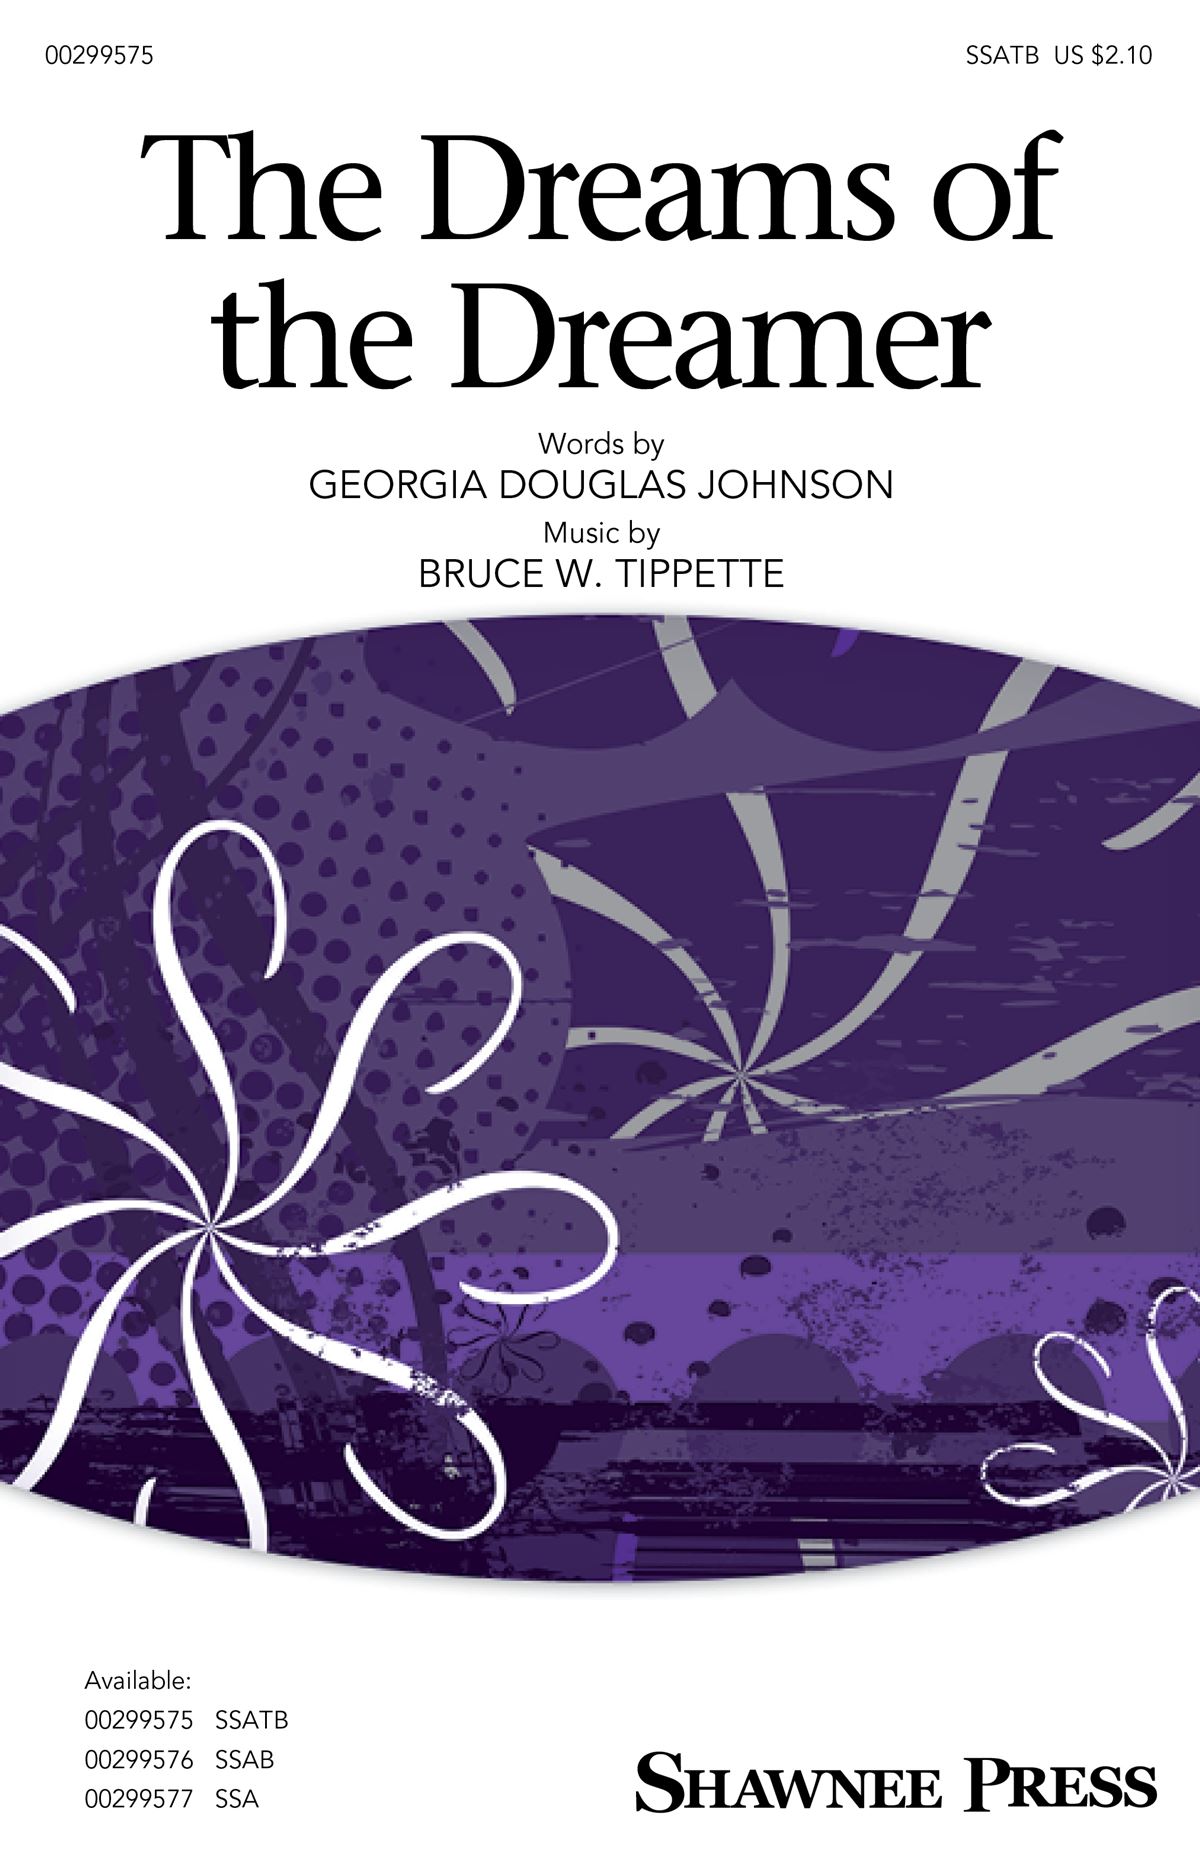 Bruce W. Tippette: The Dreams of the Dreamer: Mixed Choir a Cappella: Vocal